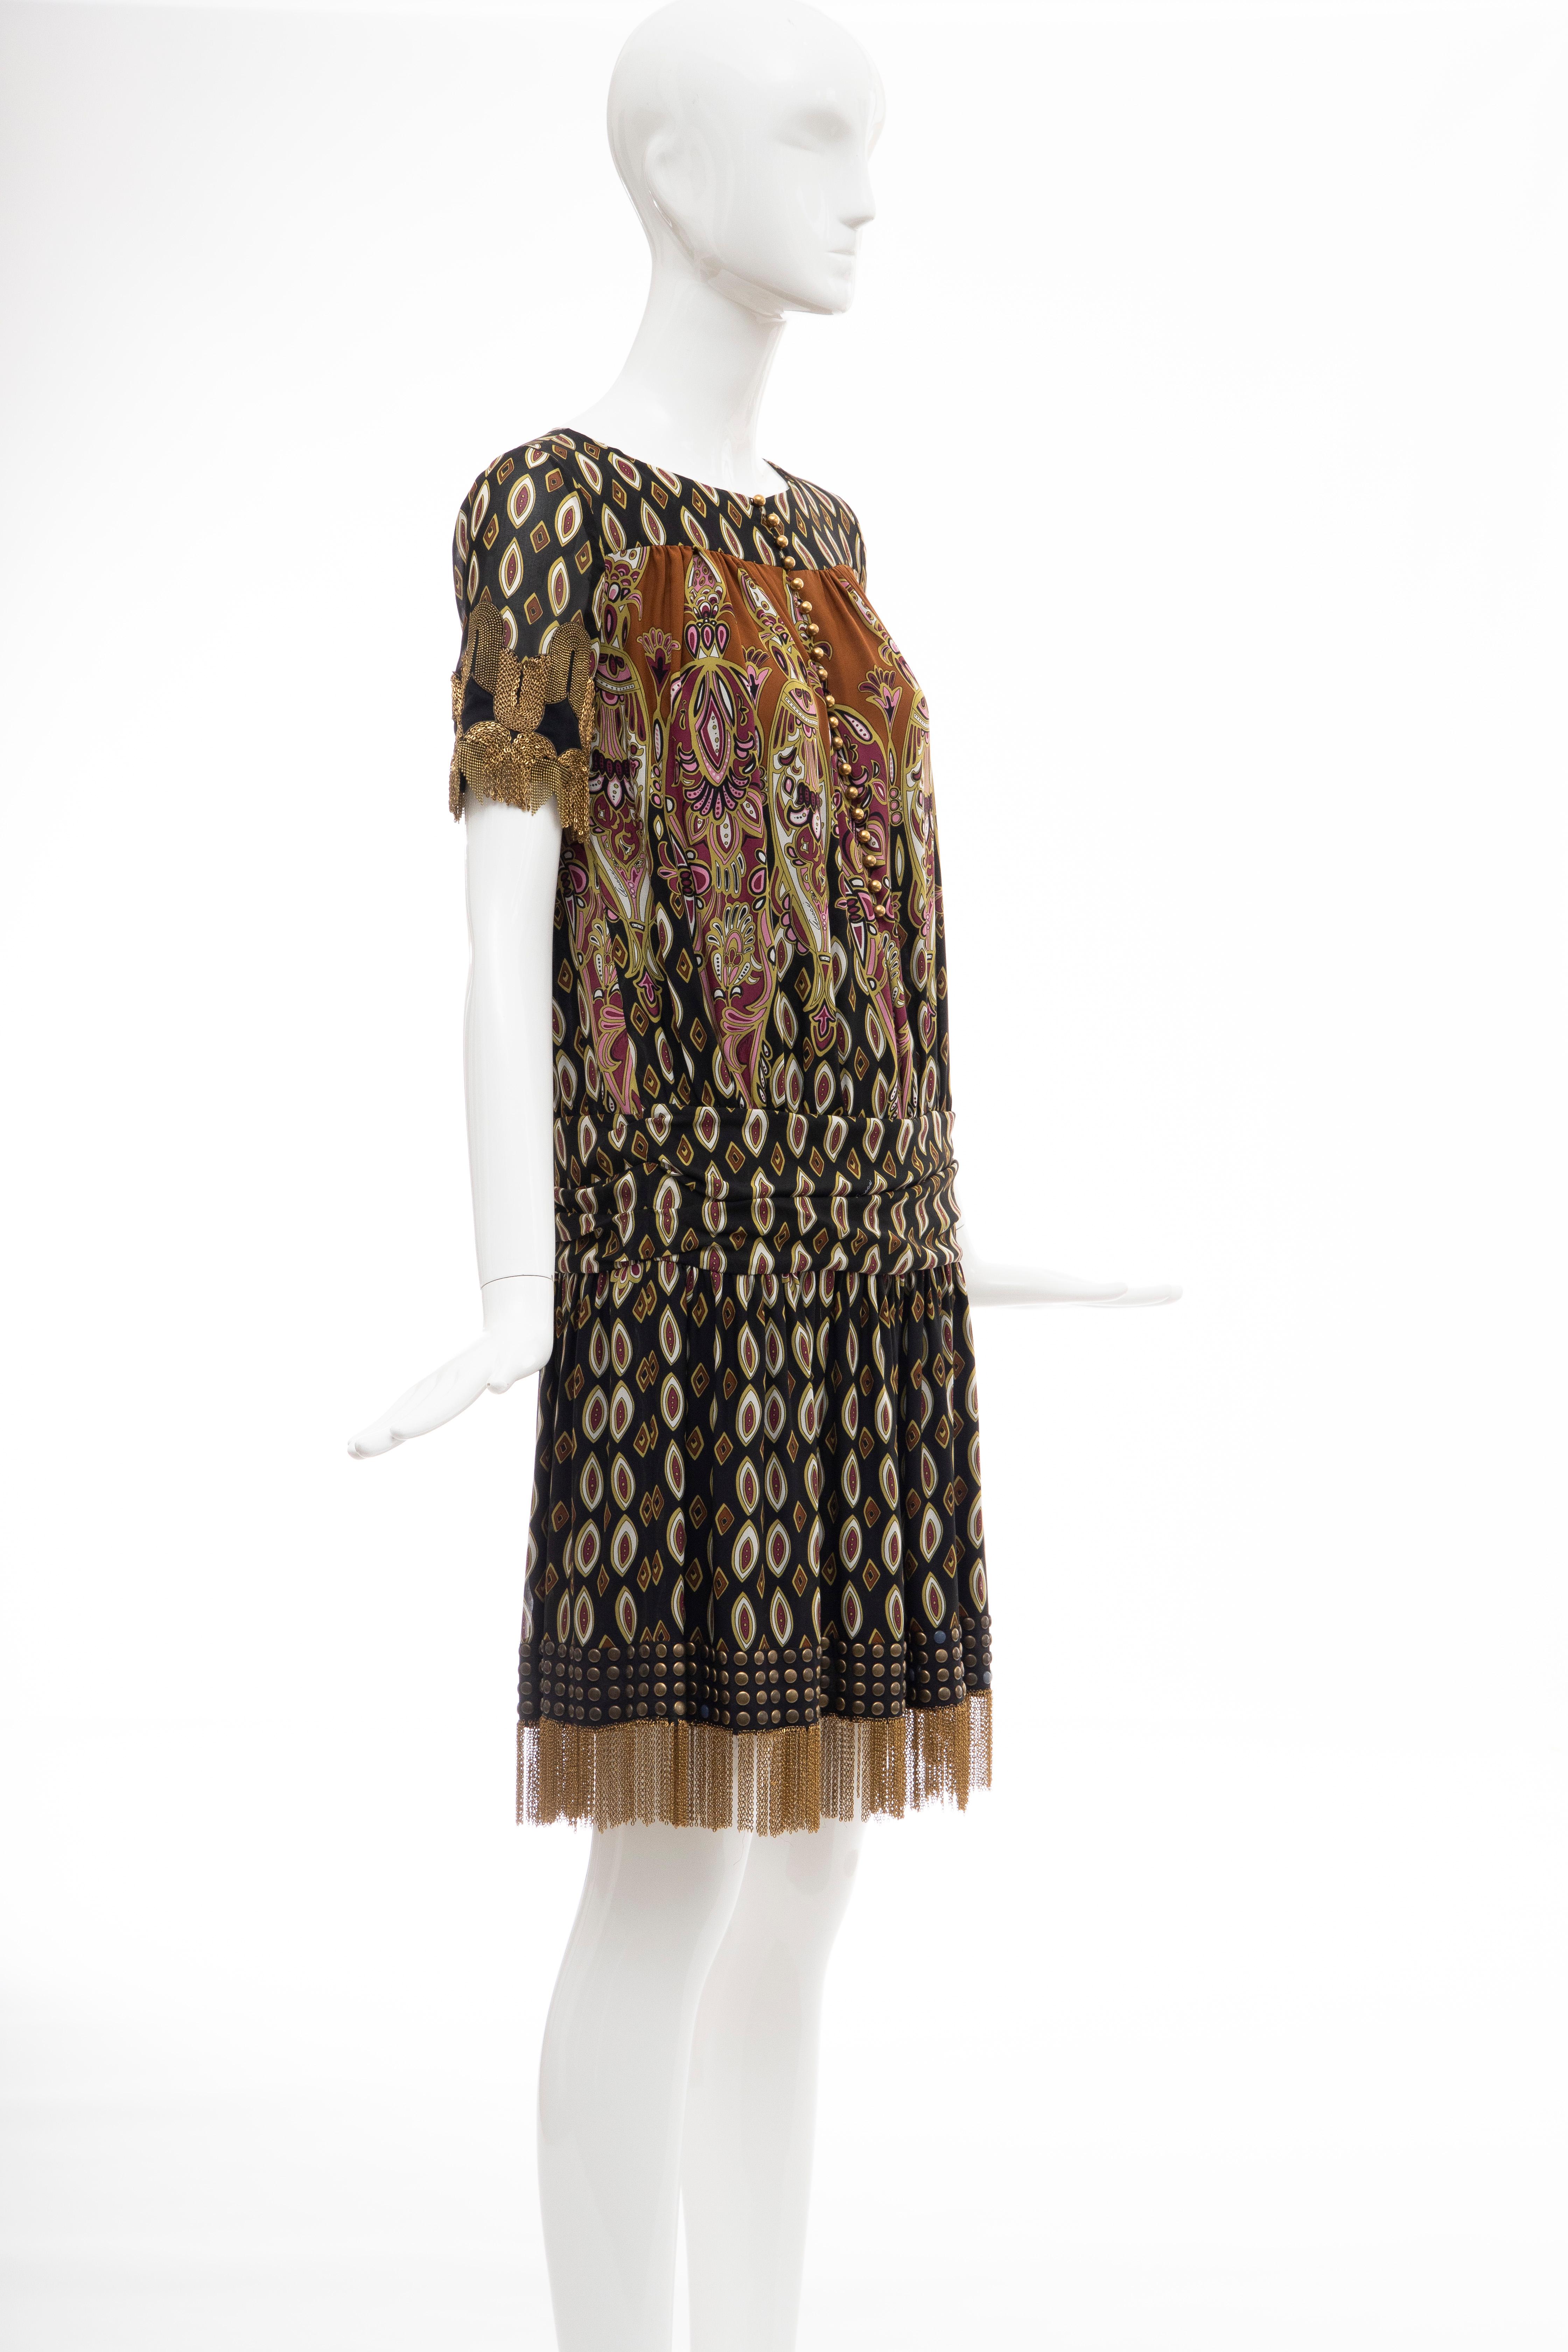 Frida Giannini for Gucci Runway Silk Boteh Pattern Brass Chains Dress, Fall 2008 In Excellent Condition For Sale In Cincinnati, OH